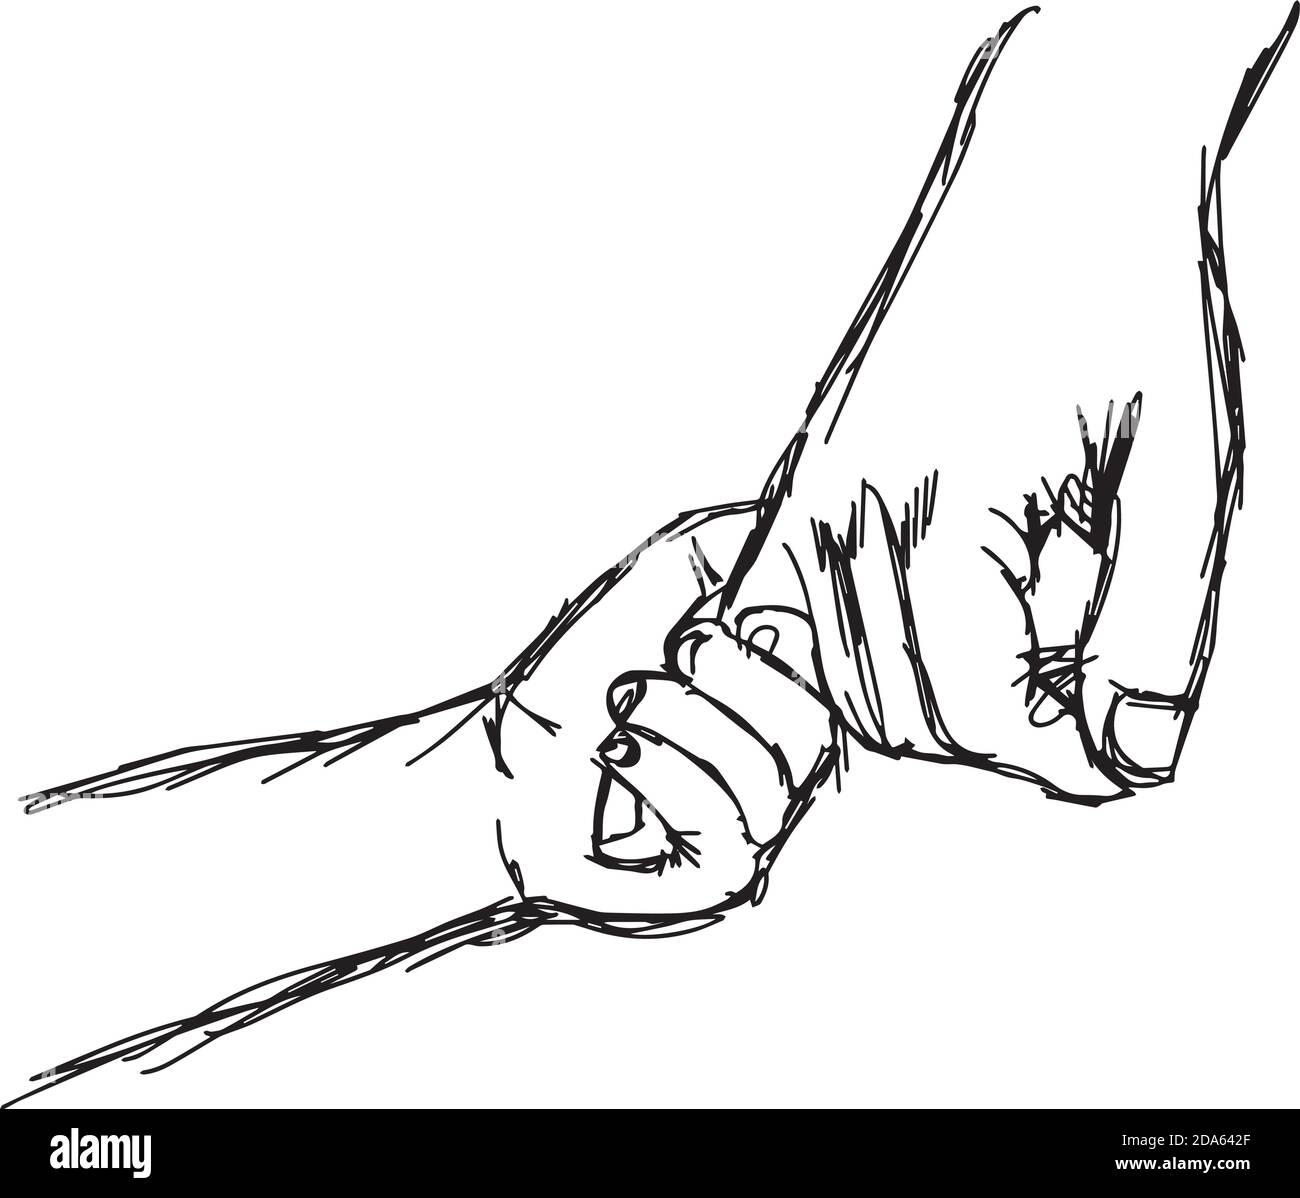 illustration vector doodle hand drawn sketch of parent holds the hand of a little child Stock Vector